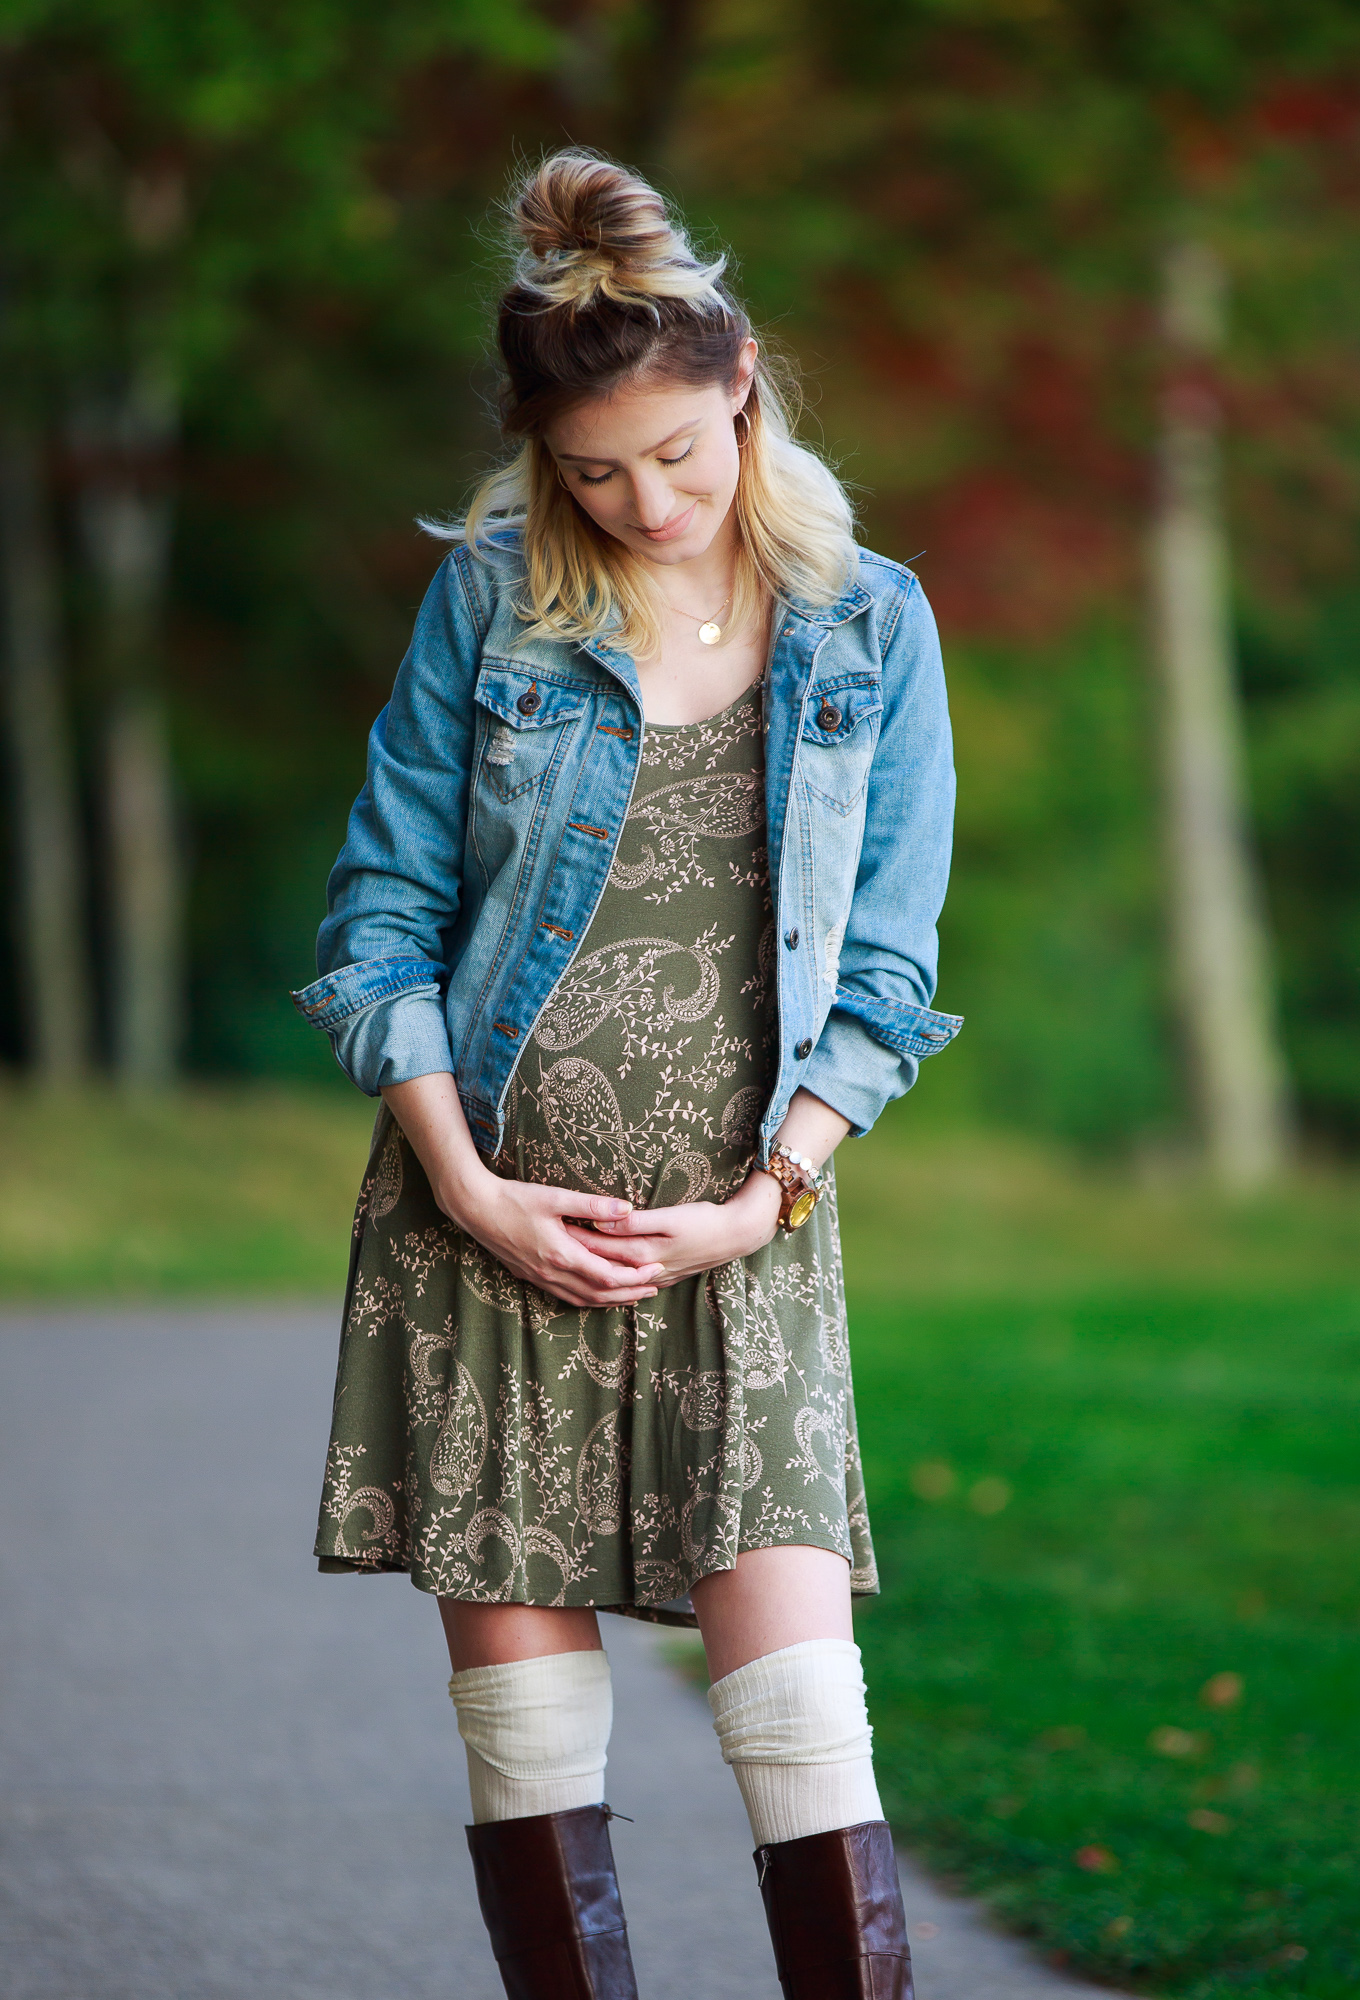 Lifestyle and fashion blogger Jessica Linn wearing a Charlotte Russe olive colored dress with a neutral paisley pattern, a denim jacket, thigh high socks, and Ralph Lauren boots. Perfect fall maternity outfit!